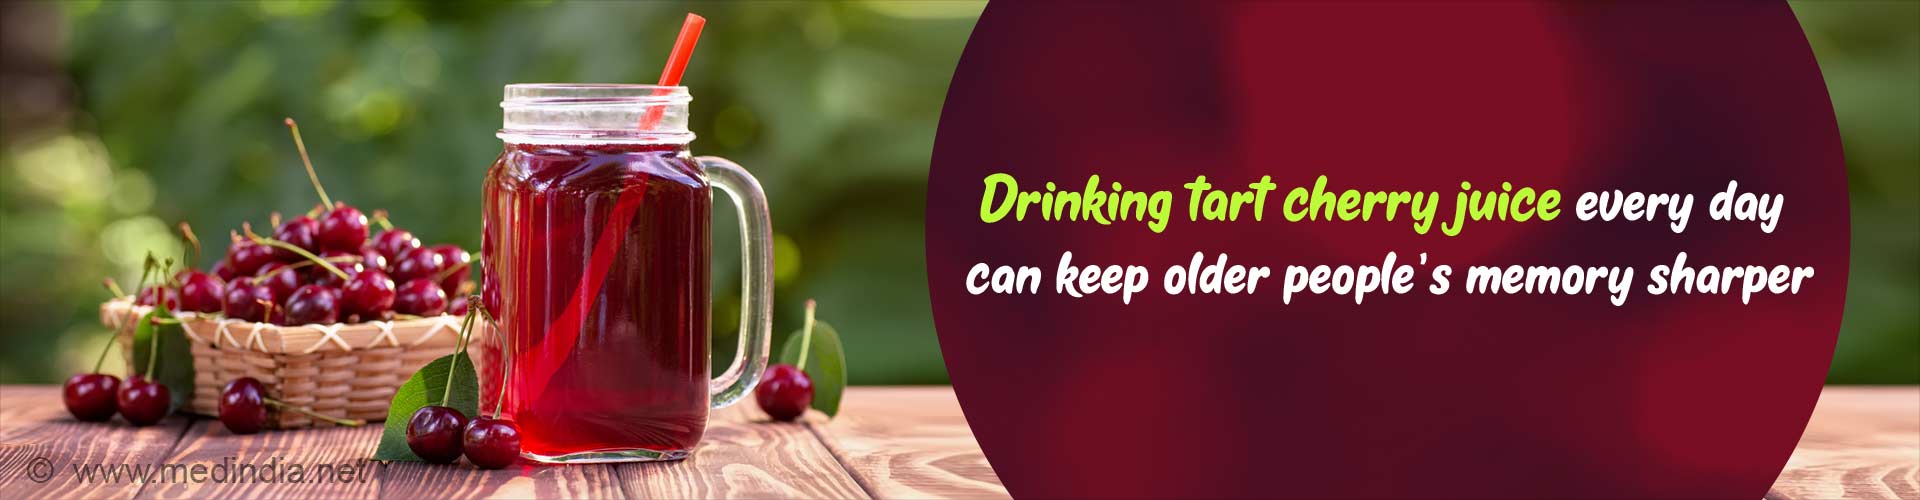 Drinking tart cherry juice every day can keep older people's memory sharper.